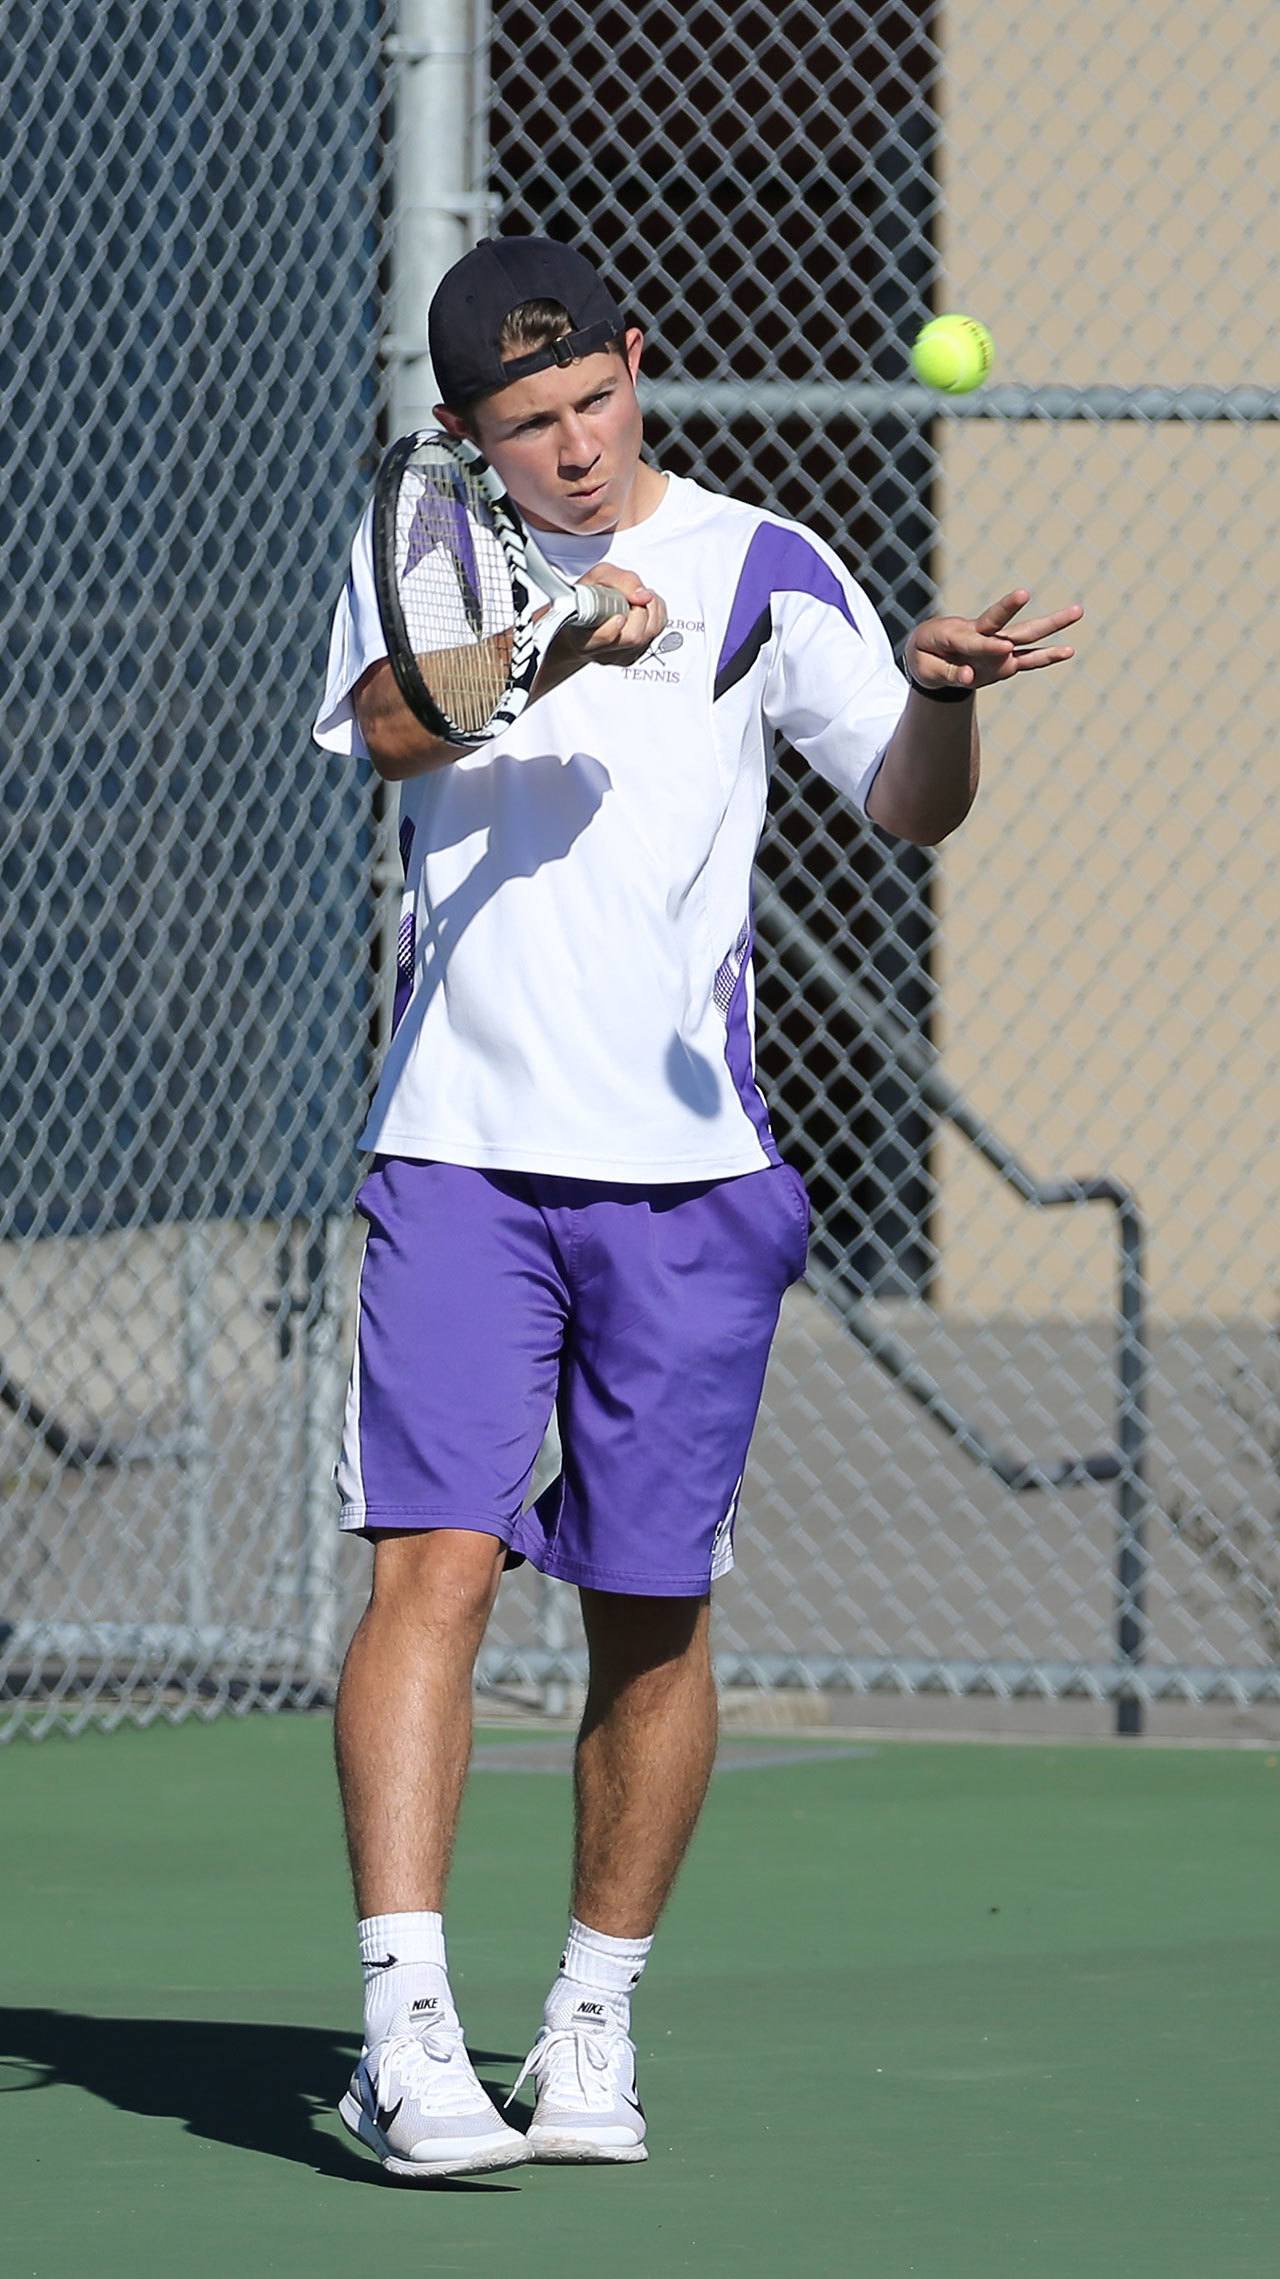 Mitchell earned all-league honors in his first year of tennis. (Photo by John Fisken)